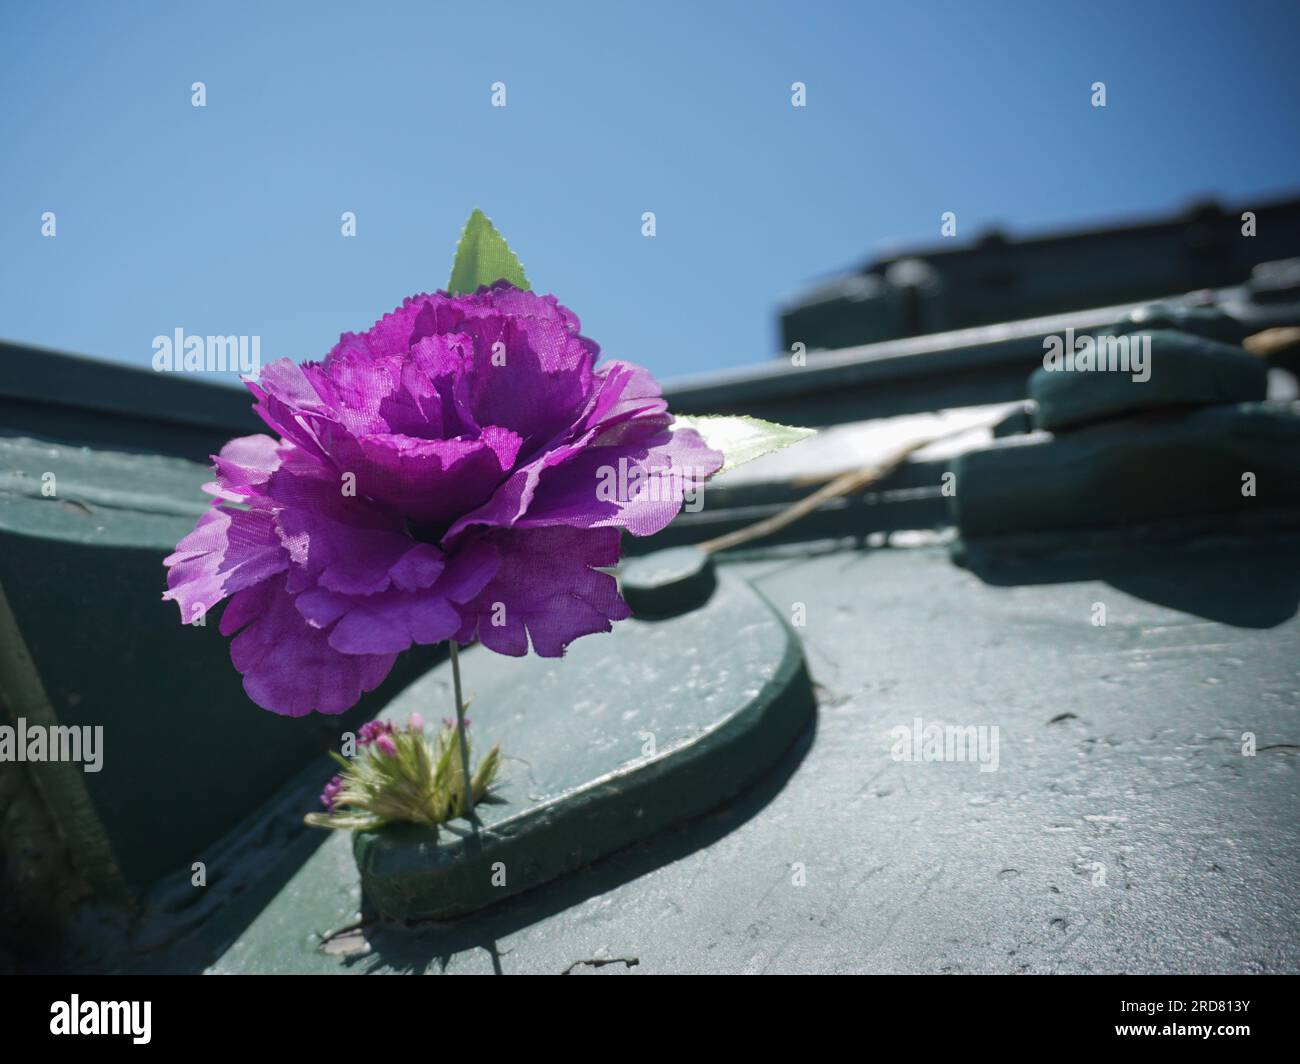 June 13, 2019, Stepanakert, Azerbaijan: A flower is seen placed on an Azerbaijani tank captured by soldiers from Karabakh. during the First Nagorno-Karabakh War in 1988. The tank is considered a victory for Karabakh and now situated outside the town of Shusha, Nagorno-Karabakh. The unrecognised yet de facto independent country in South Caucasus, Nagorno-Karabakh (also known as Artsakh) has been in the longest-running territorial dispute between Azerbaijan and Armenia in post-Soviet Eurasia since the collapse of Soviet Union. It is mainly populated by ethnic Armenians. (Credit Image: © Jasmine Stock Photo